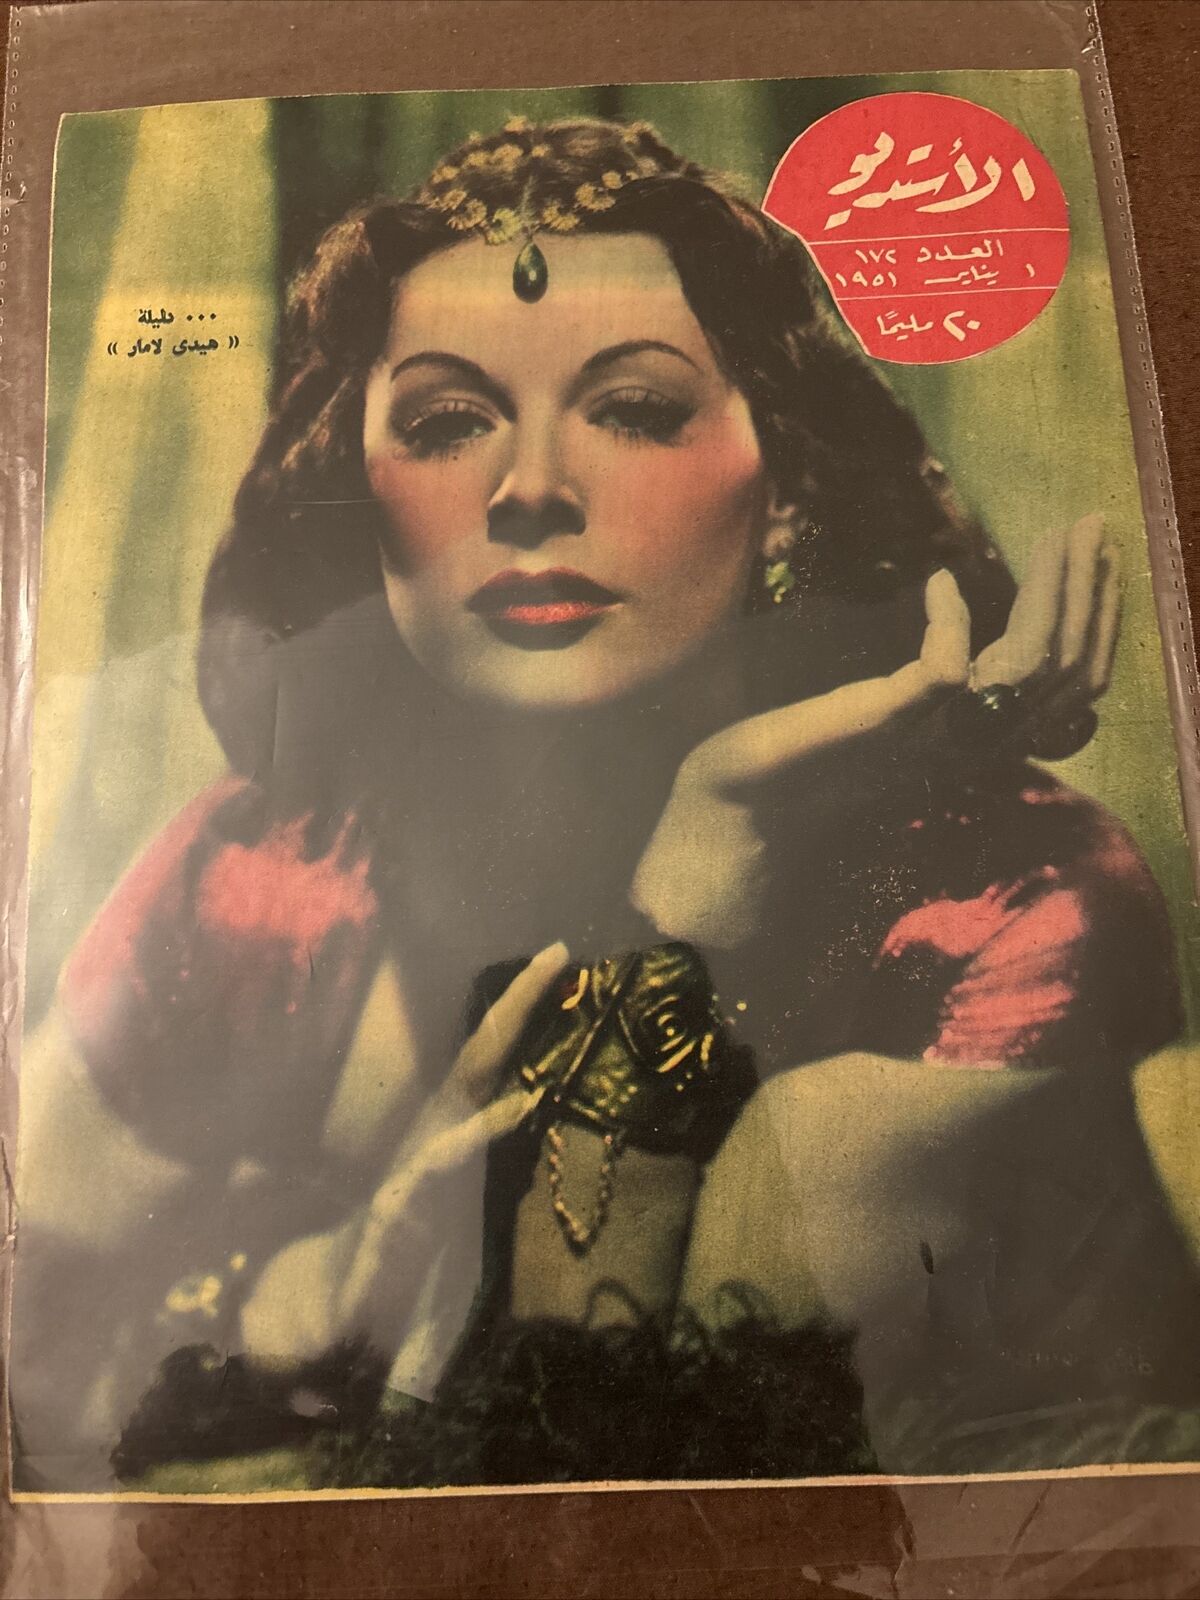 1952 Studio Magazine Actress Hedy Lamarr Cover Arabic Scarce Cover Great Cond